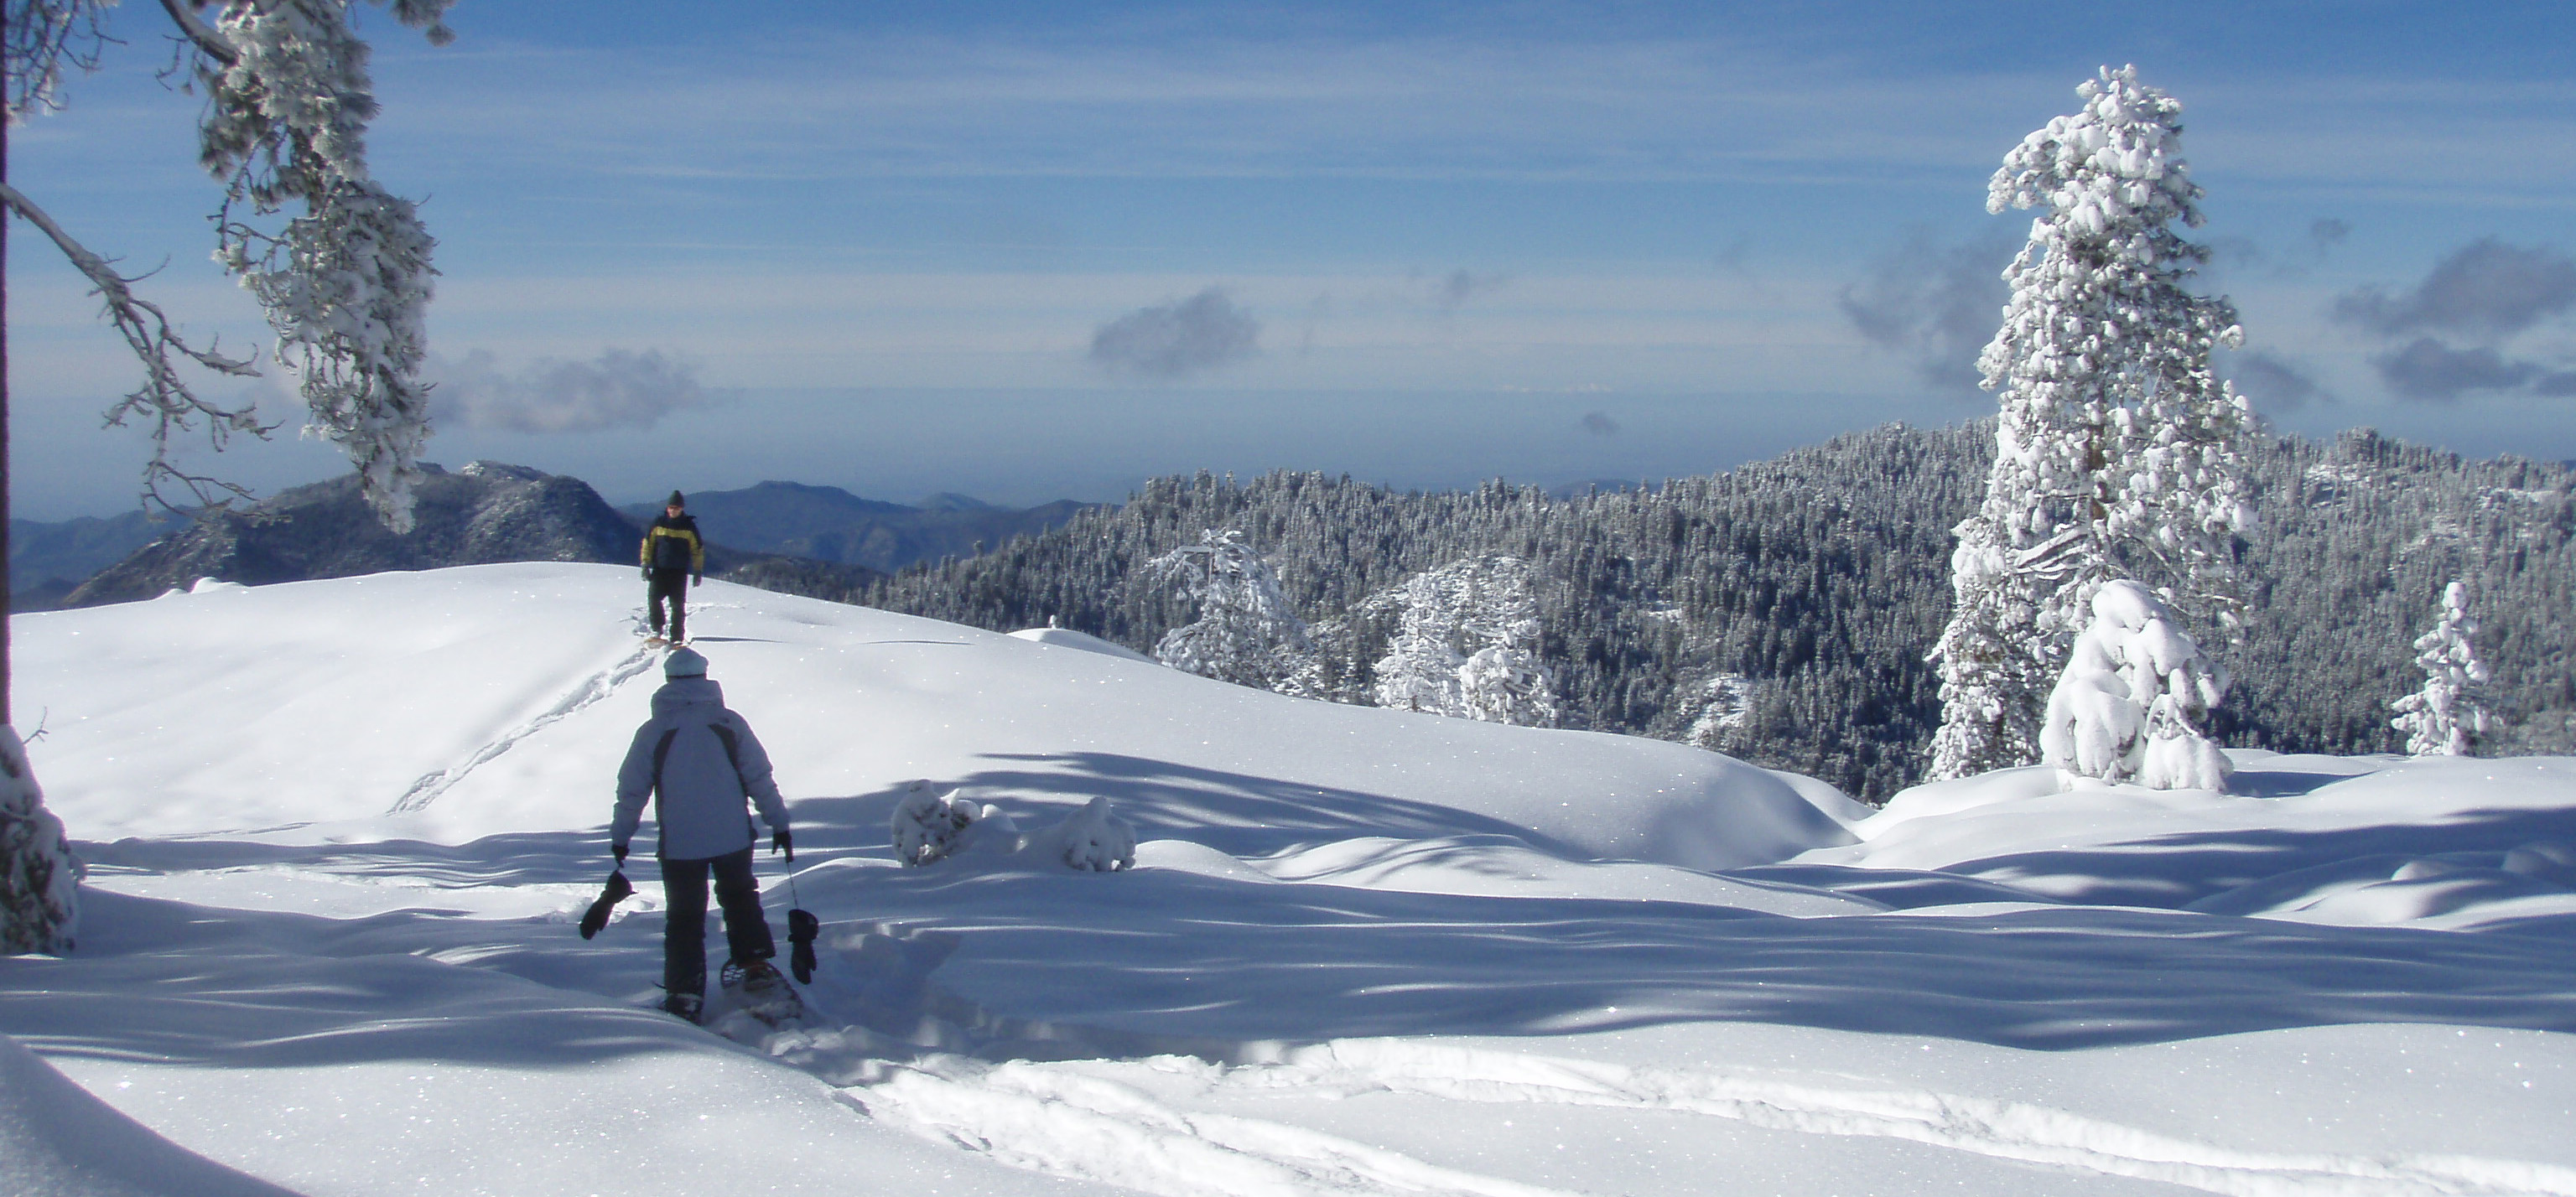 Skiing & Snowshoeing - Sequoia & Kings Canyon National Parks (U.S. National Park Service)